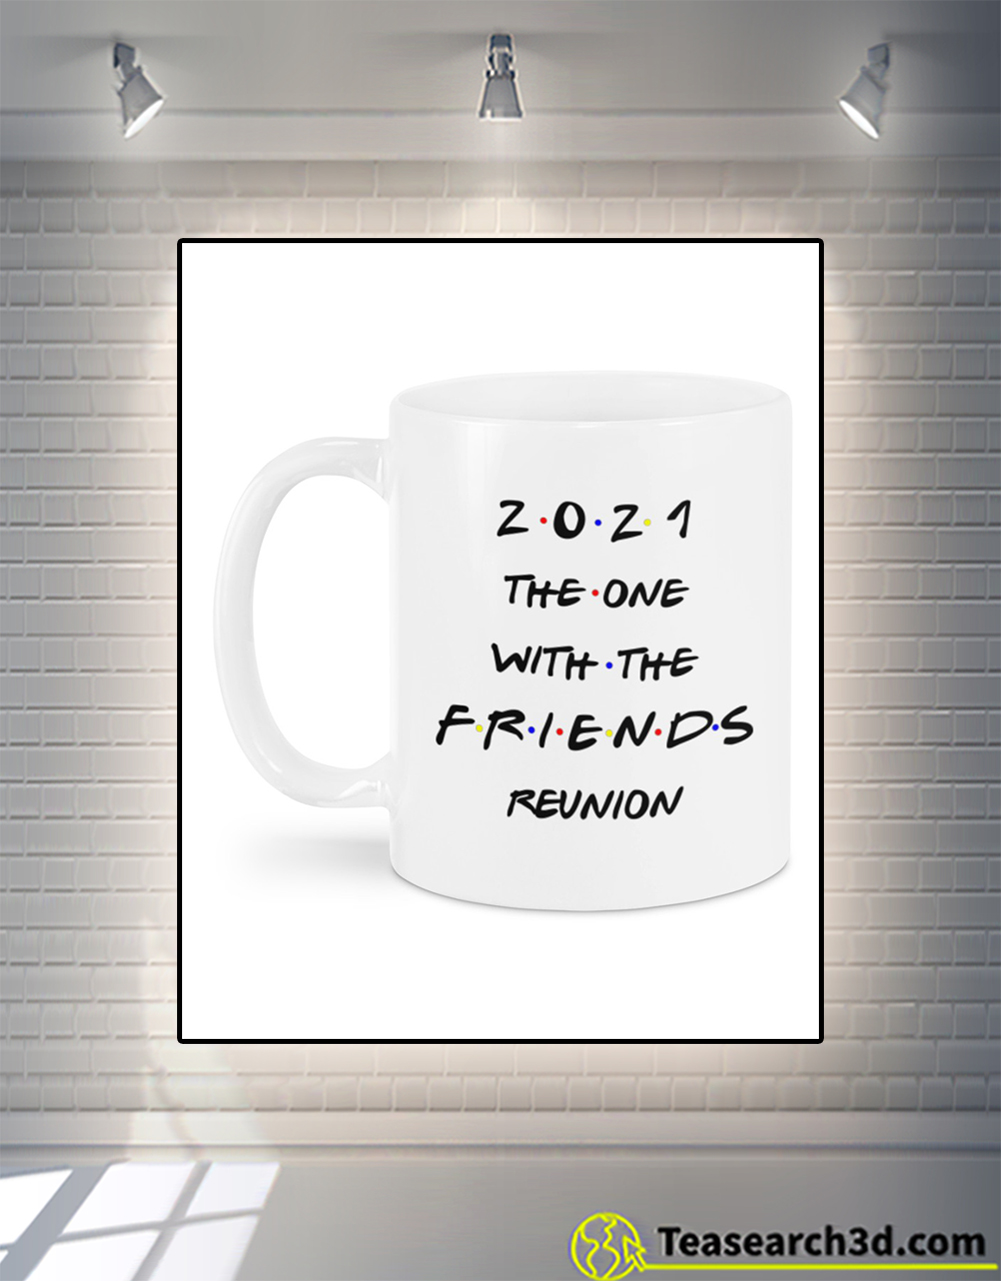 2021 the one with the FRIENDS reunion mug